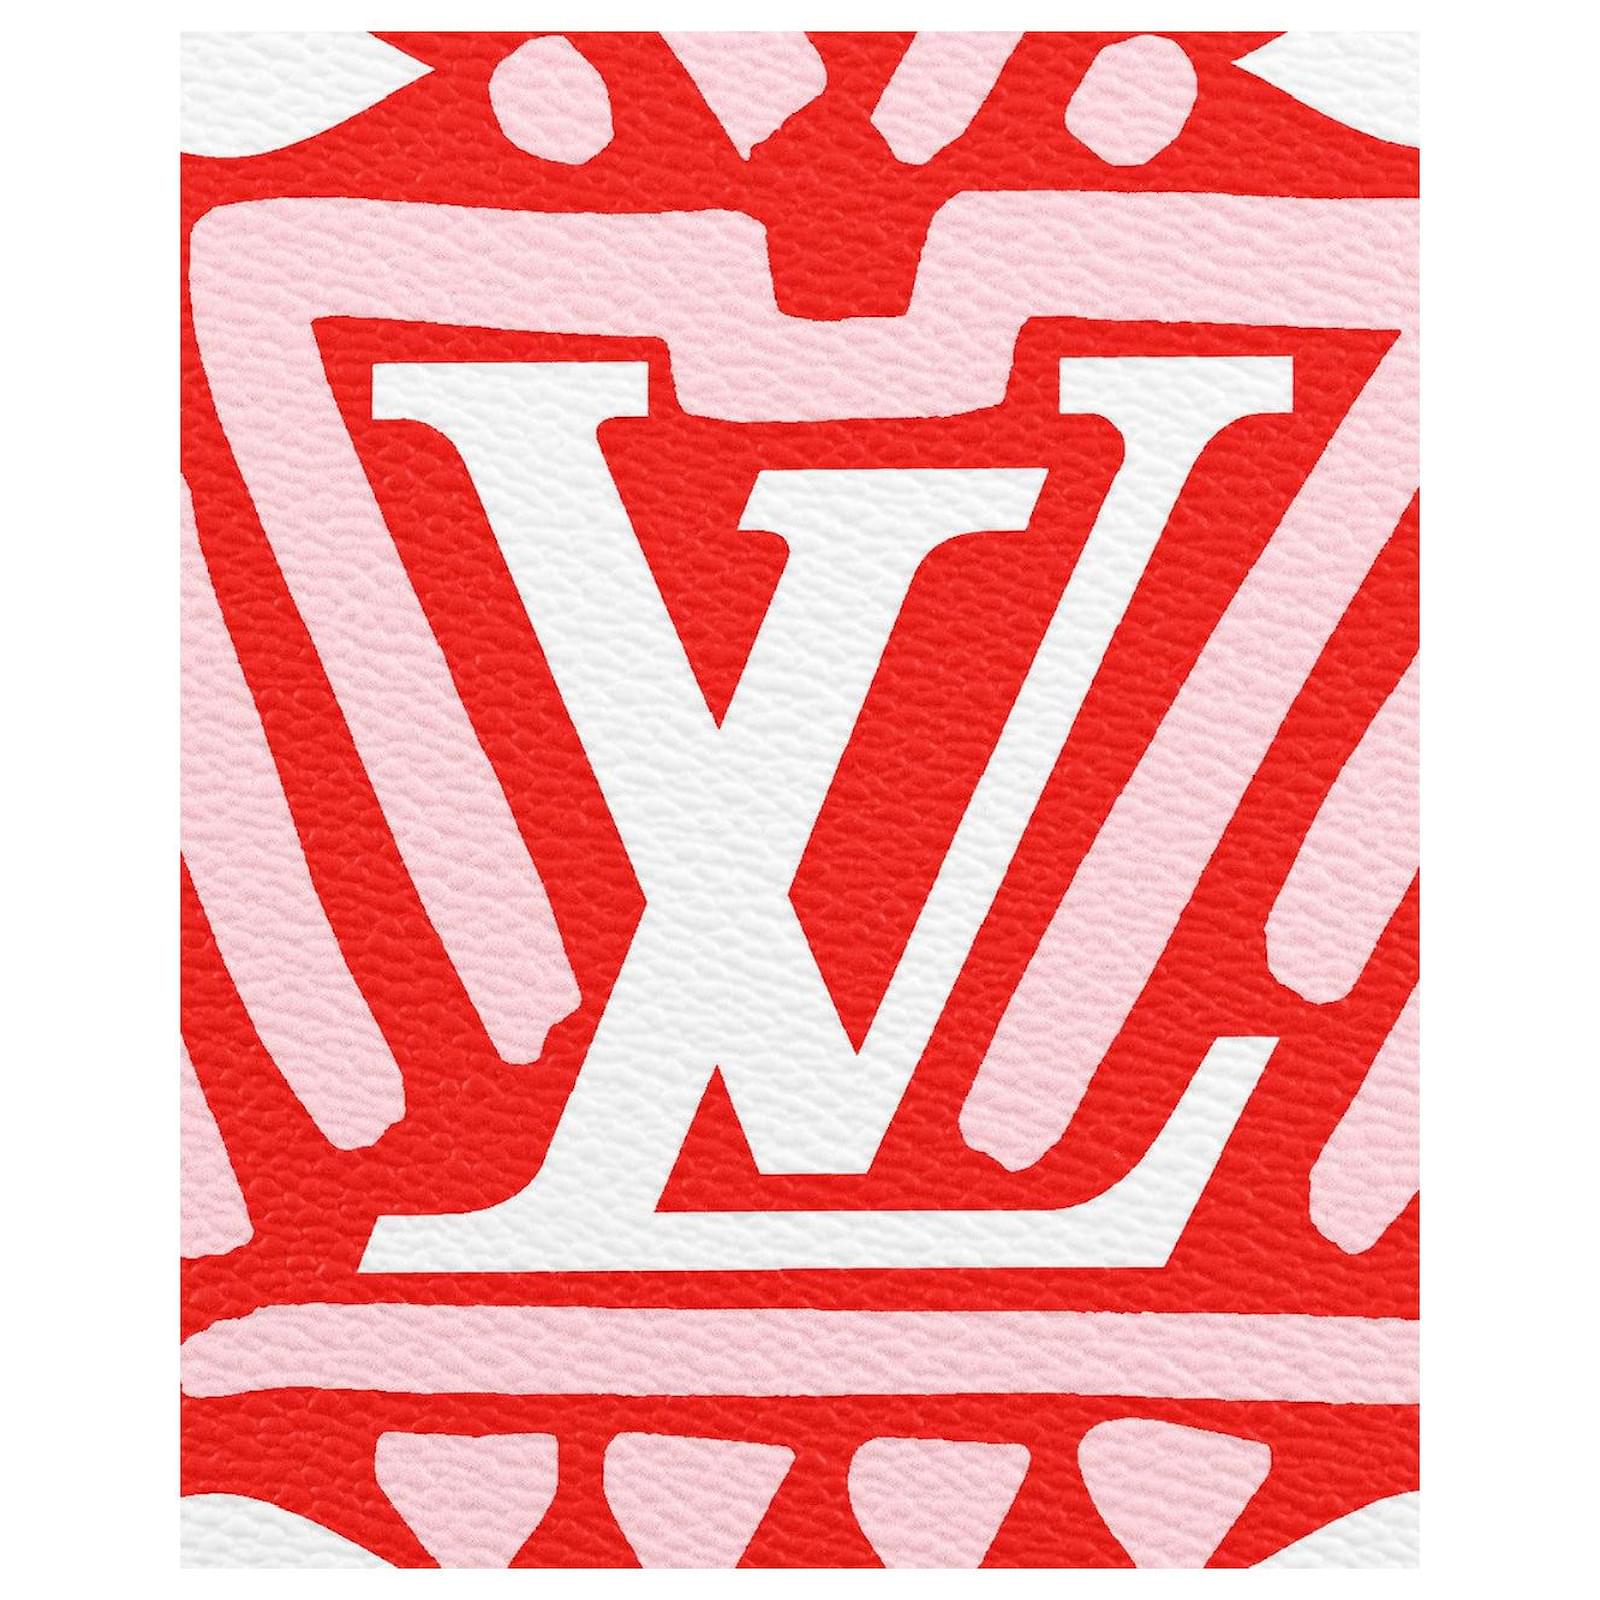 Louis Vuitton Lv Crafty Néonoé Mm in Red